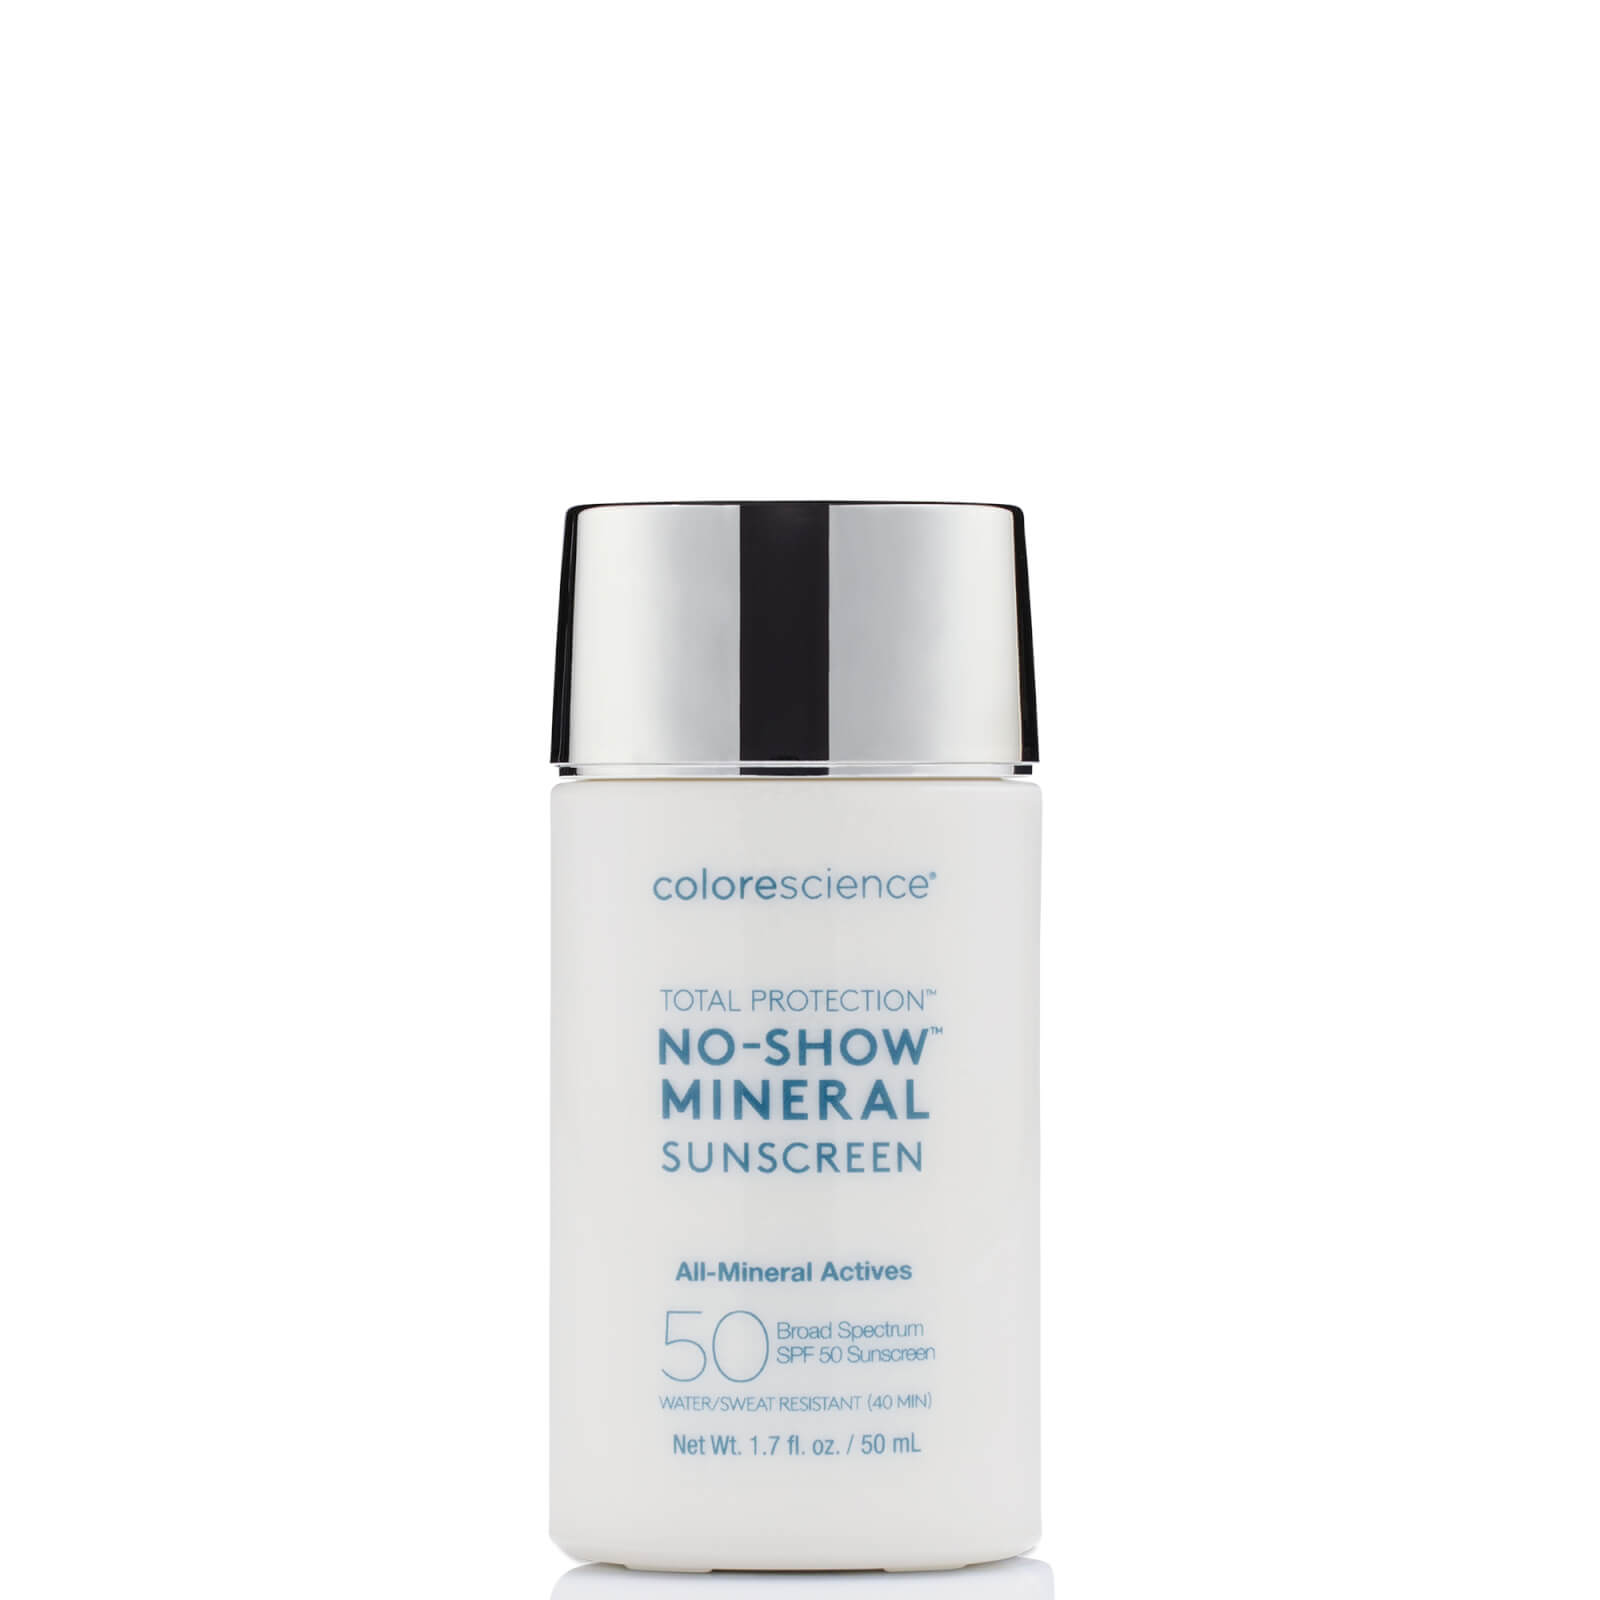 Shop Colorescience Spf 50 Total Protection No-show Mineral Sunscreen 1.7 oz